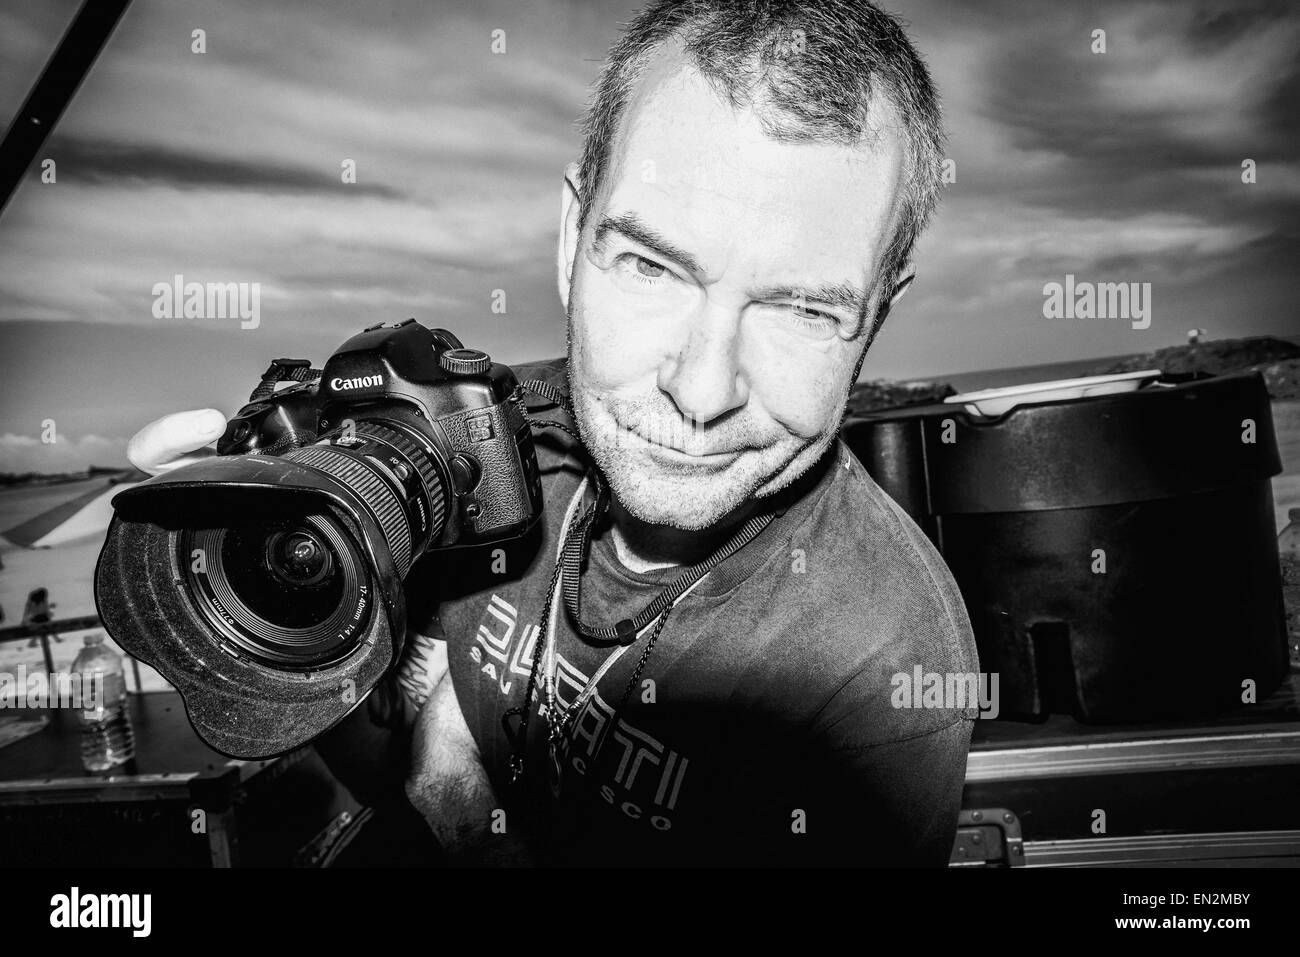 Miami, Florida, USA. 20th Apr, 2015. Legendary rock photographer NEIL ZLOZOWER shooting on stage at Monsters Of Rock Cruise on board of MSC Divina in Caribbeans. © Igor Vidyashev/ZUMA Wire/Alamy Live News Stock Photo